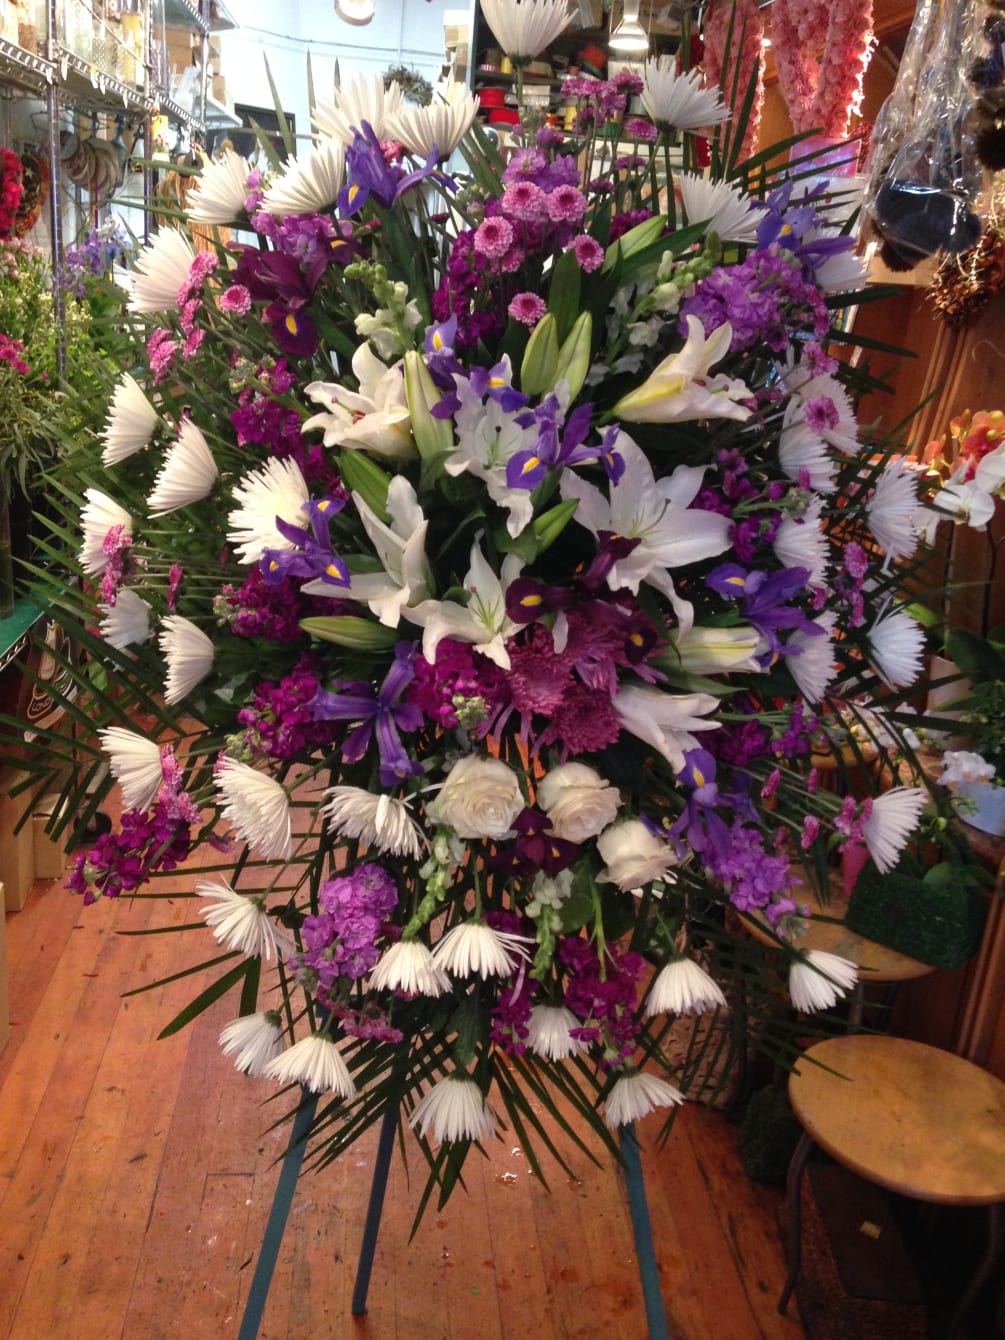 This large spray arrangement features white lilies and spider mums and is